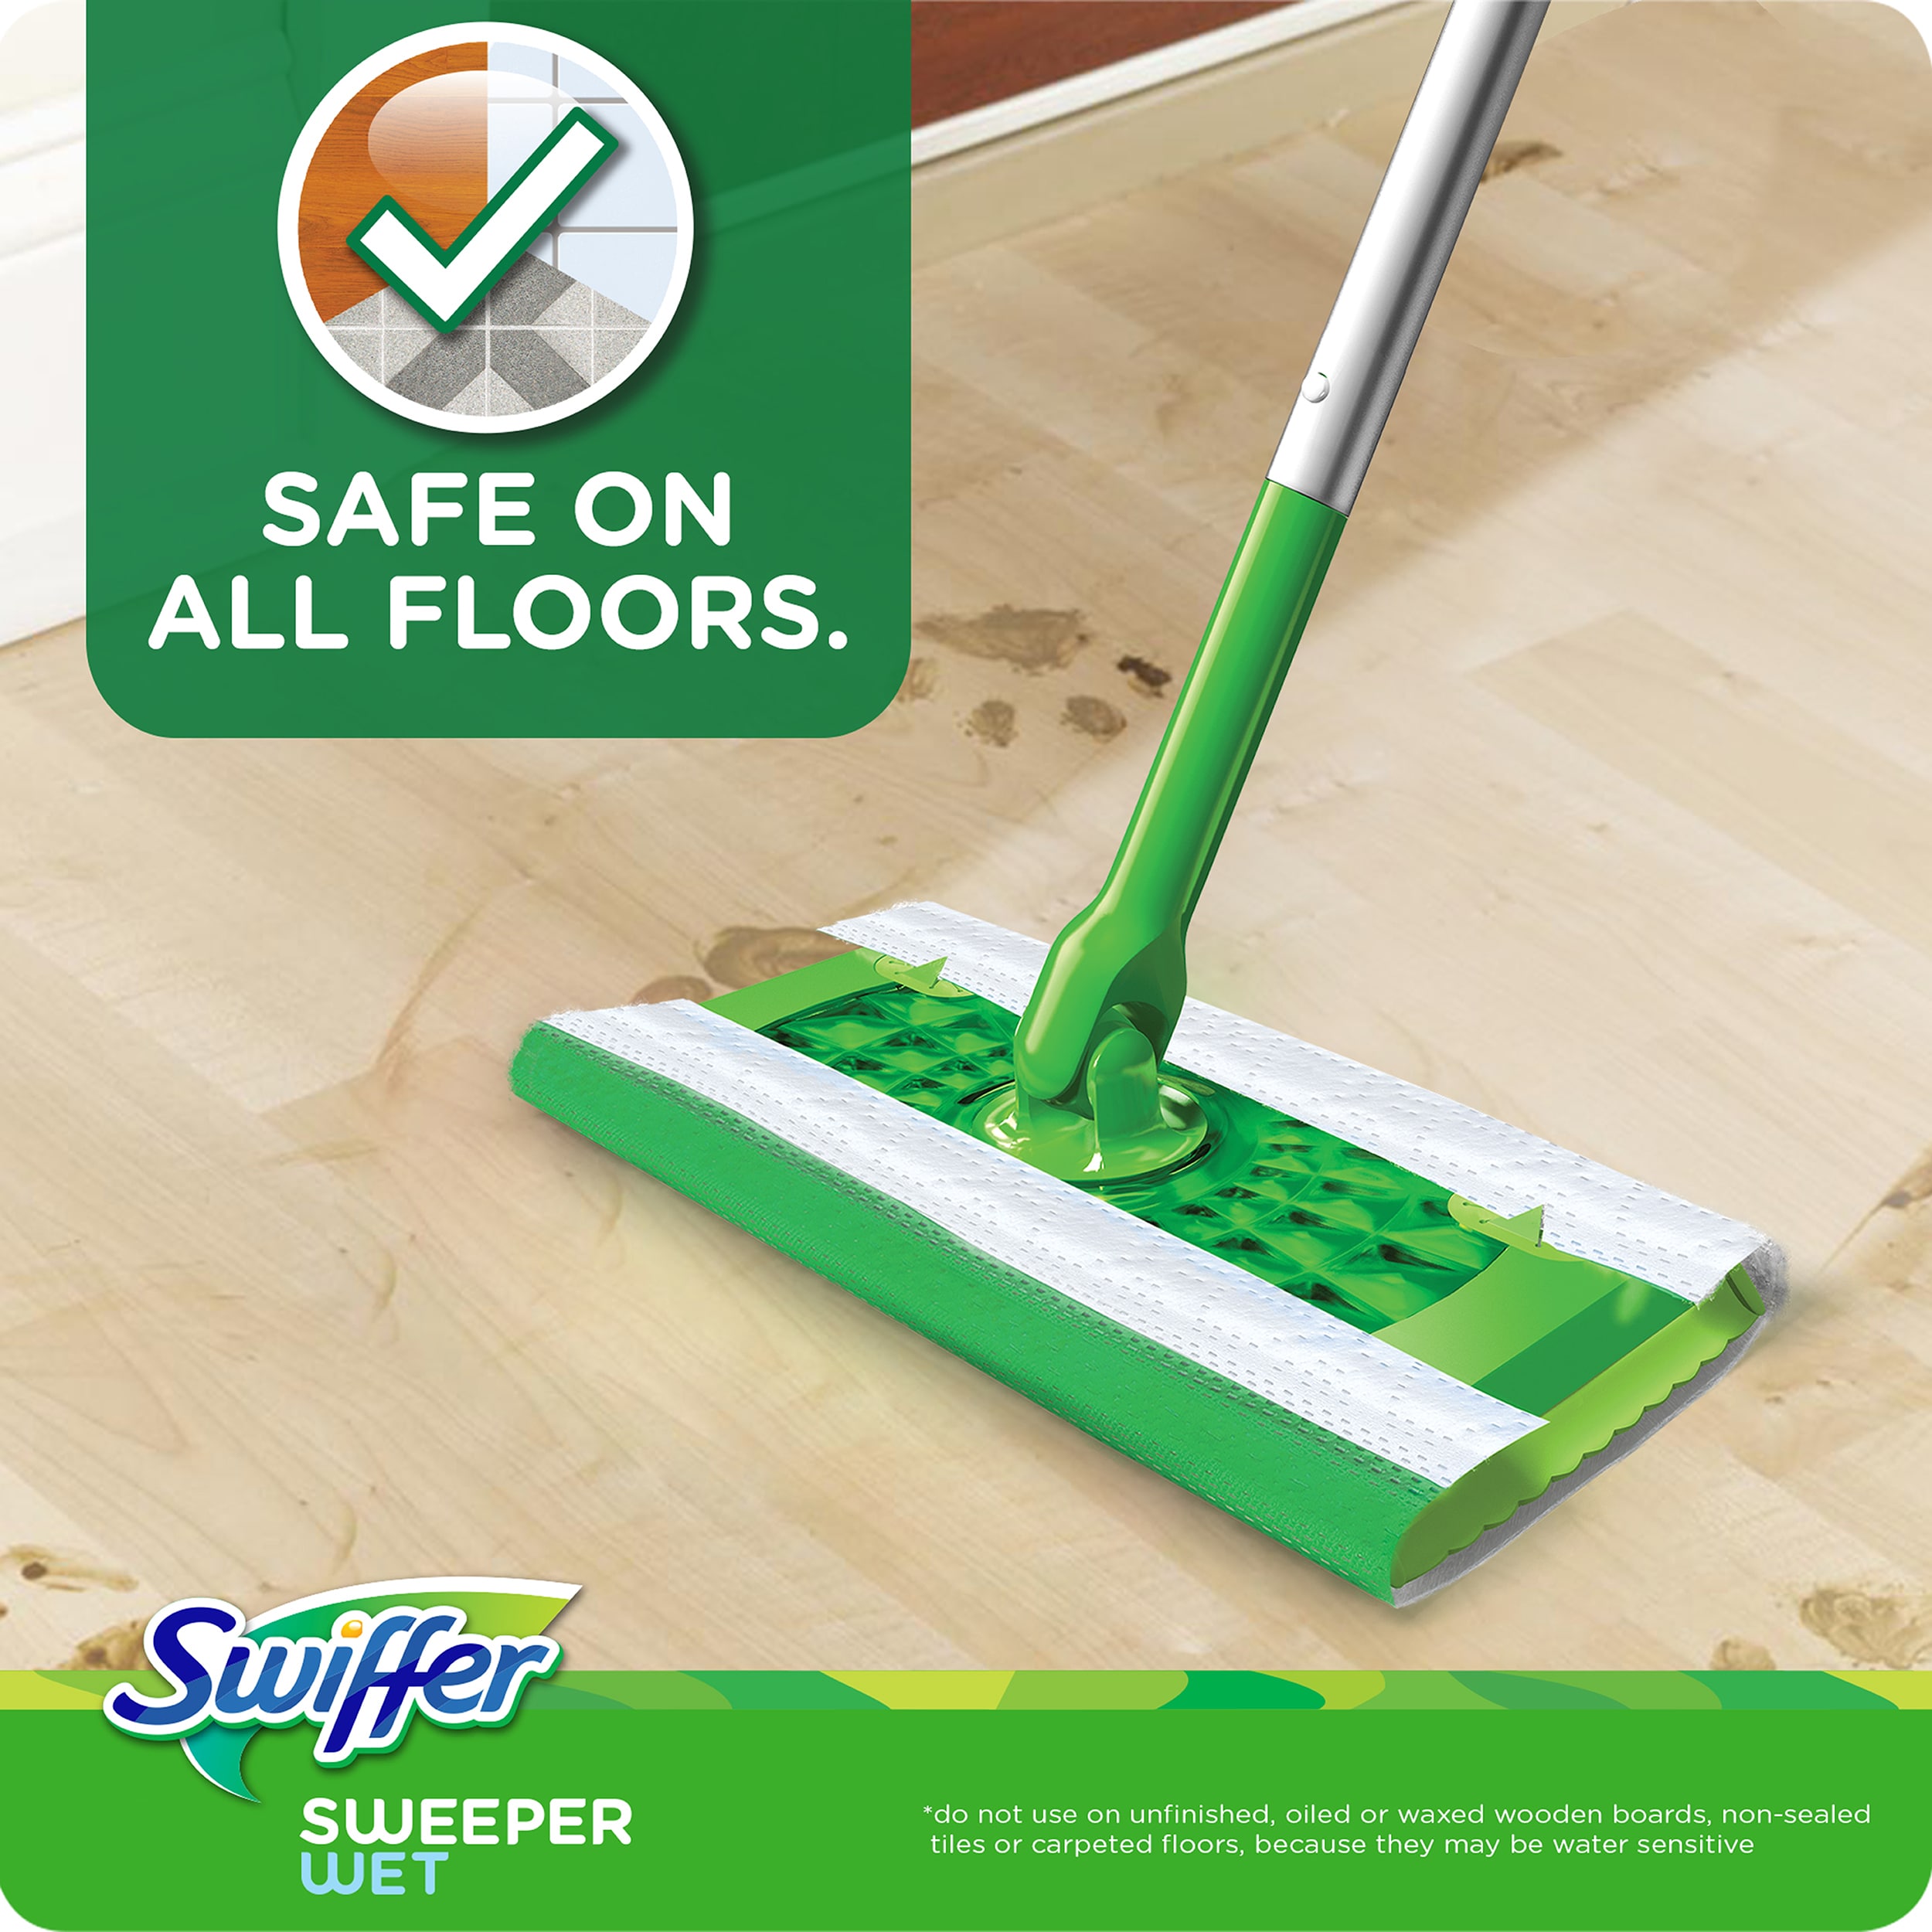 CM-018X) Swiffer Sweeper Dry and Wet Floor Mopping and Cleaning